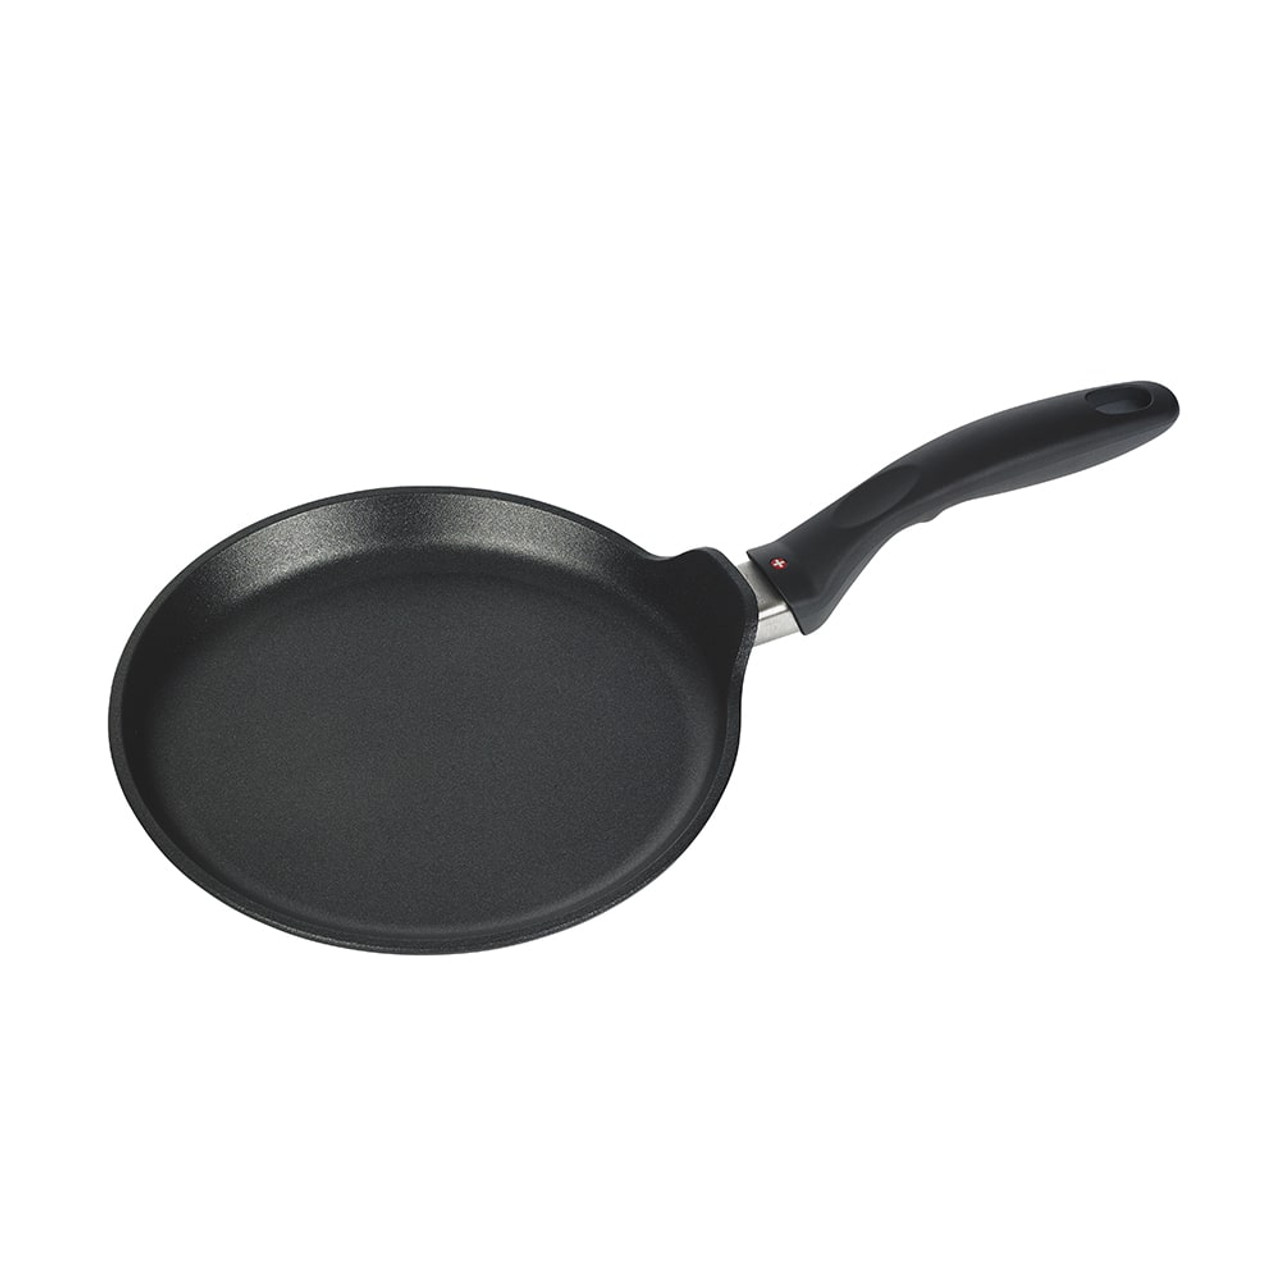 de Buyer - Mineral B Crepe & Tortilla Pan - Nonstick Frying and Pancake Pan  - Carbon and Stainless Steel - Induction-ready - 9.5 